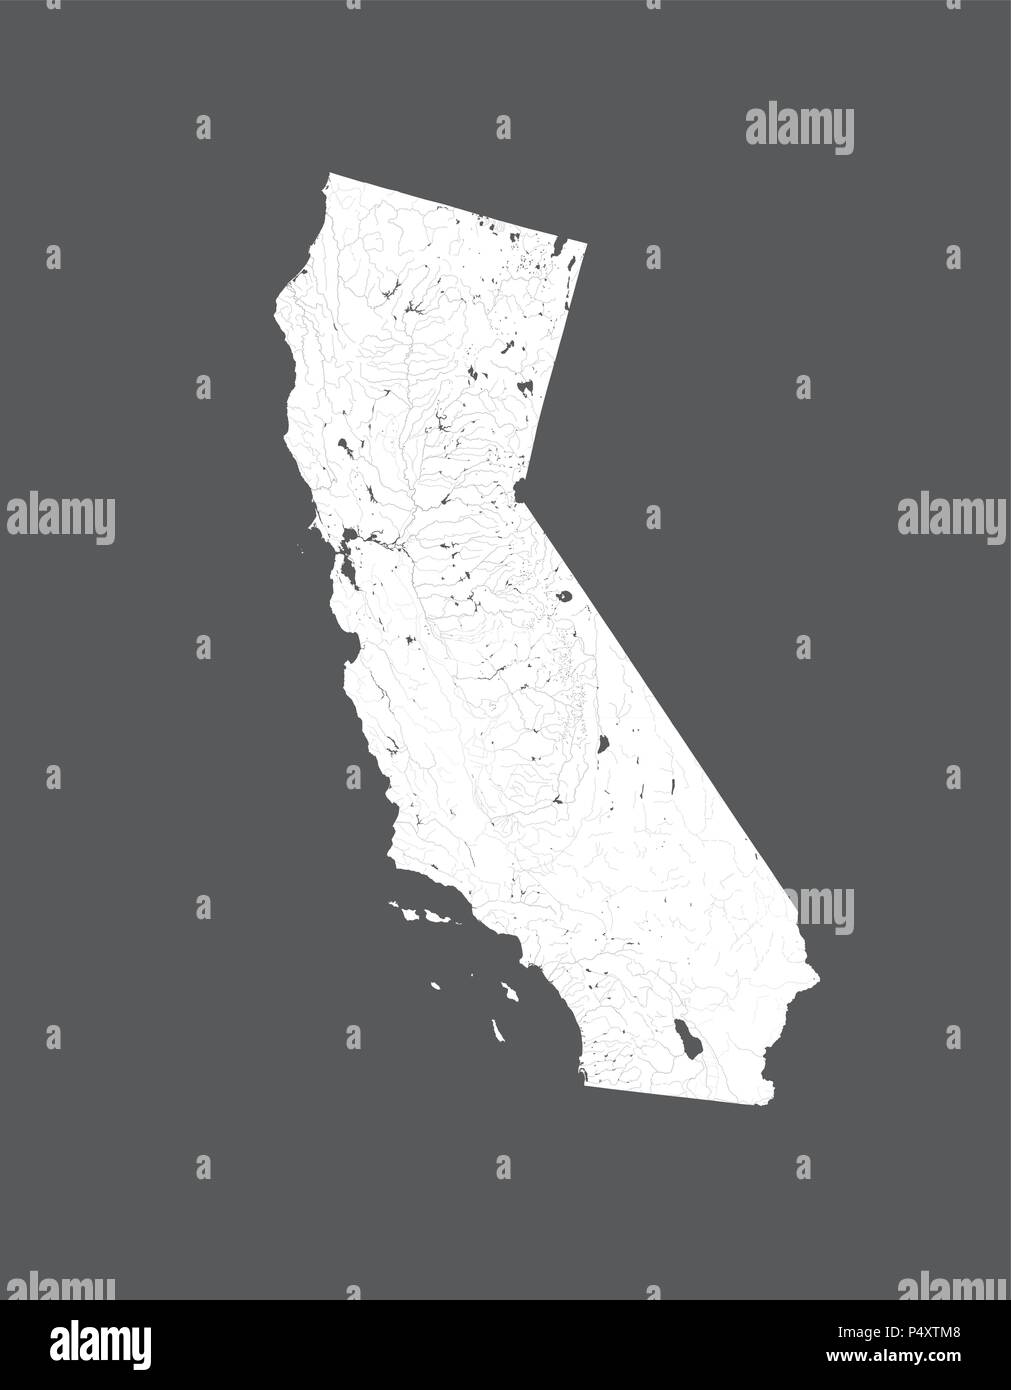 U.S. states - map of California. Hand made. Rivers and lakes are shown. Please look at my other images of cartographic series - they are all very deta Stock Vector